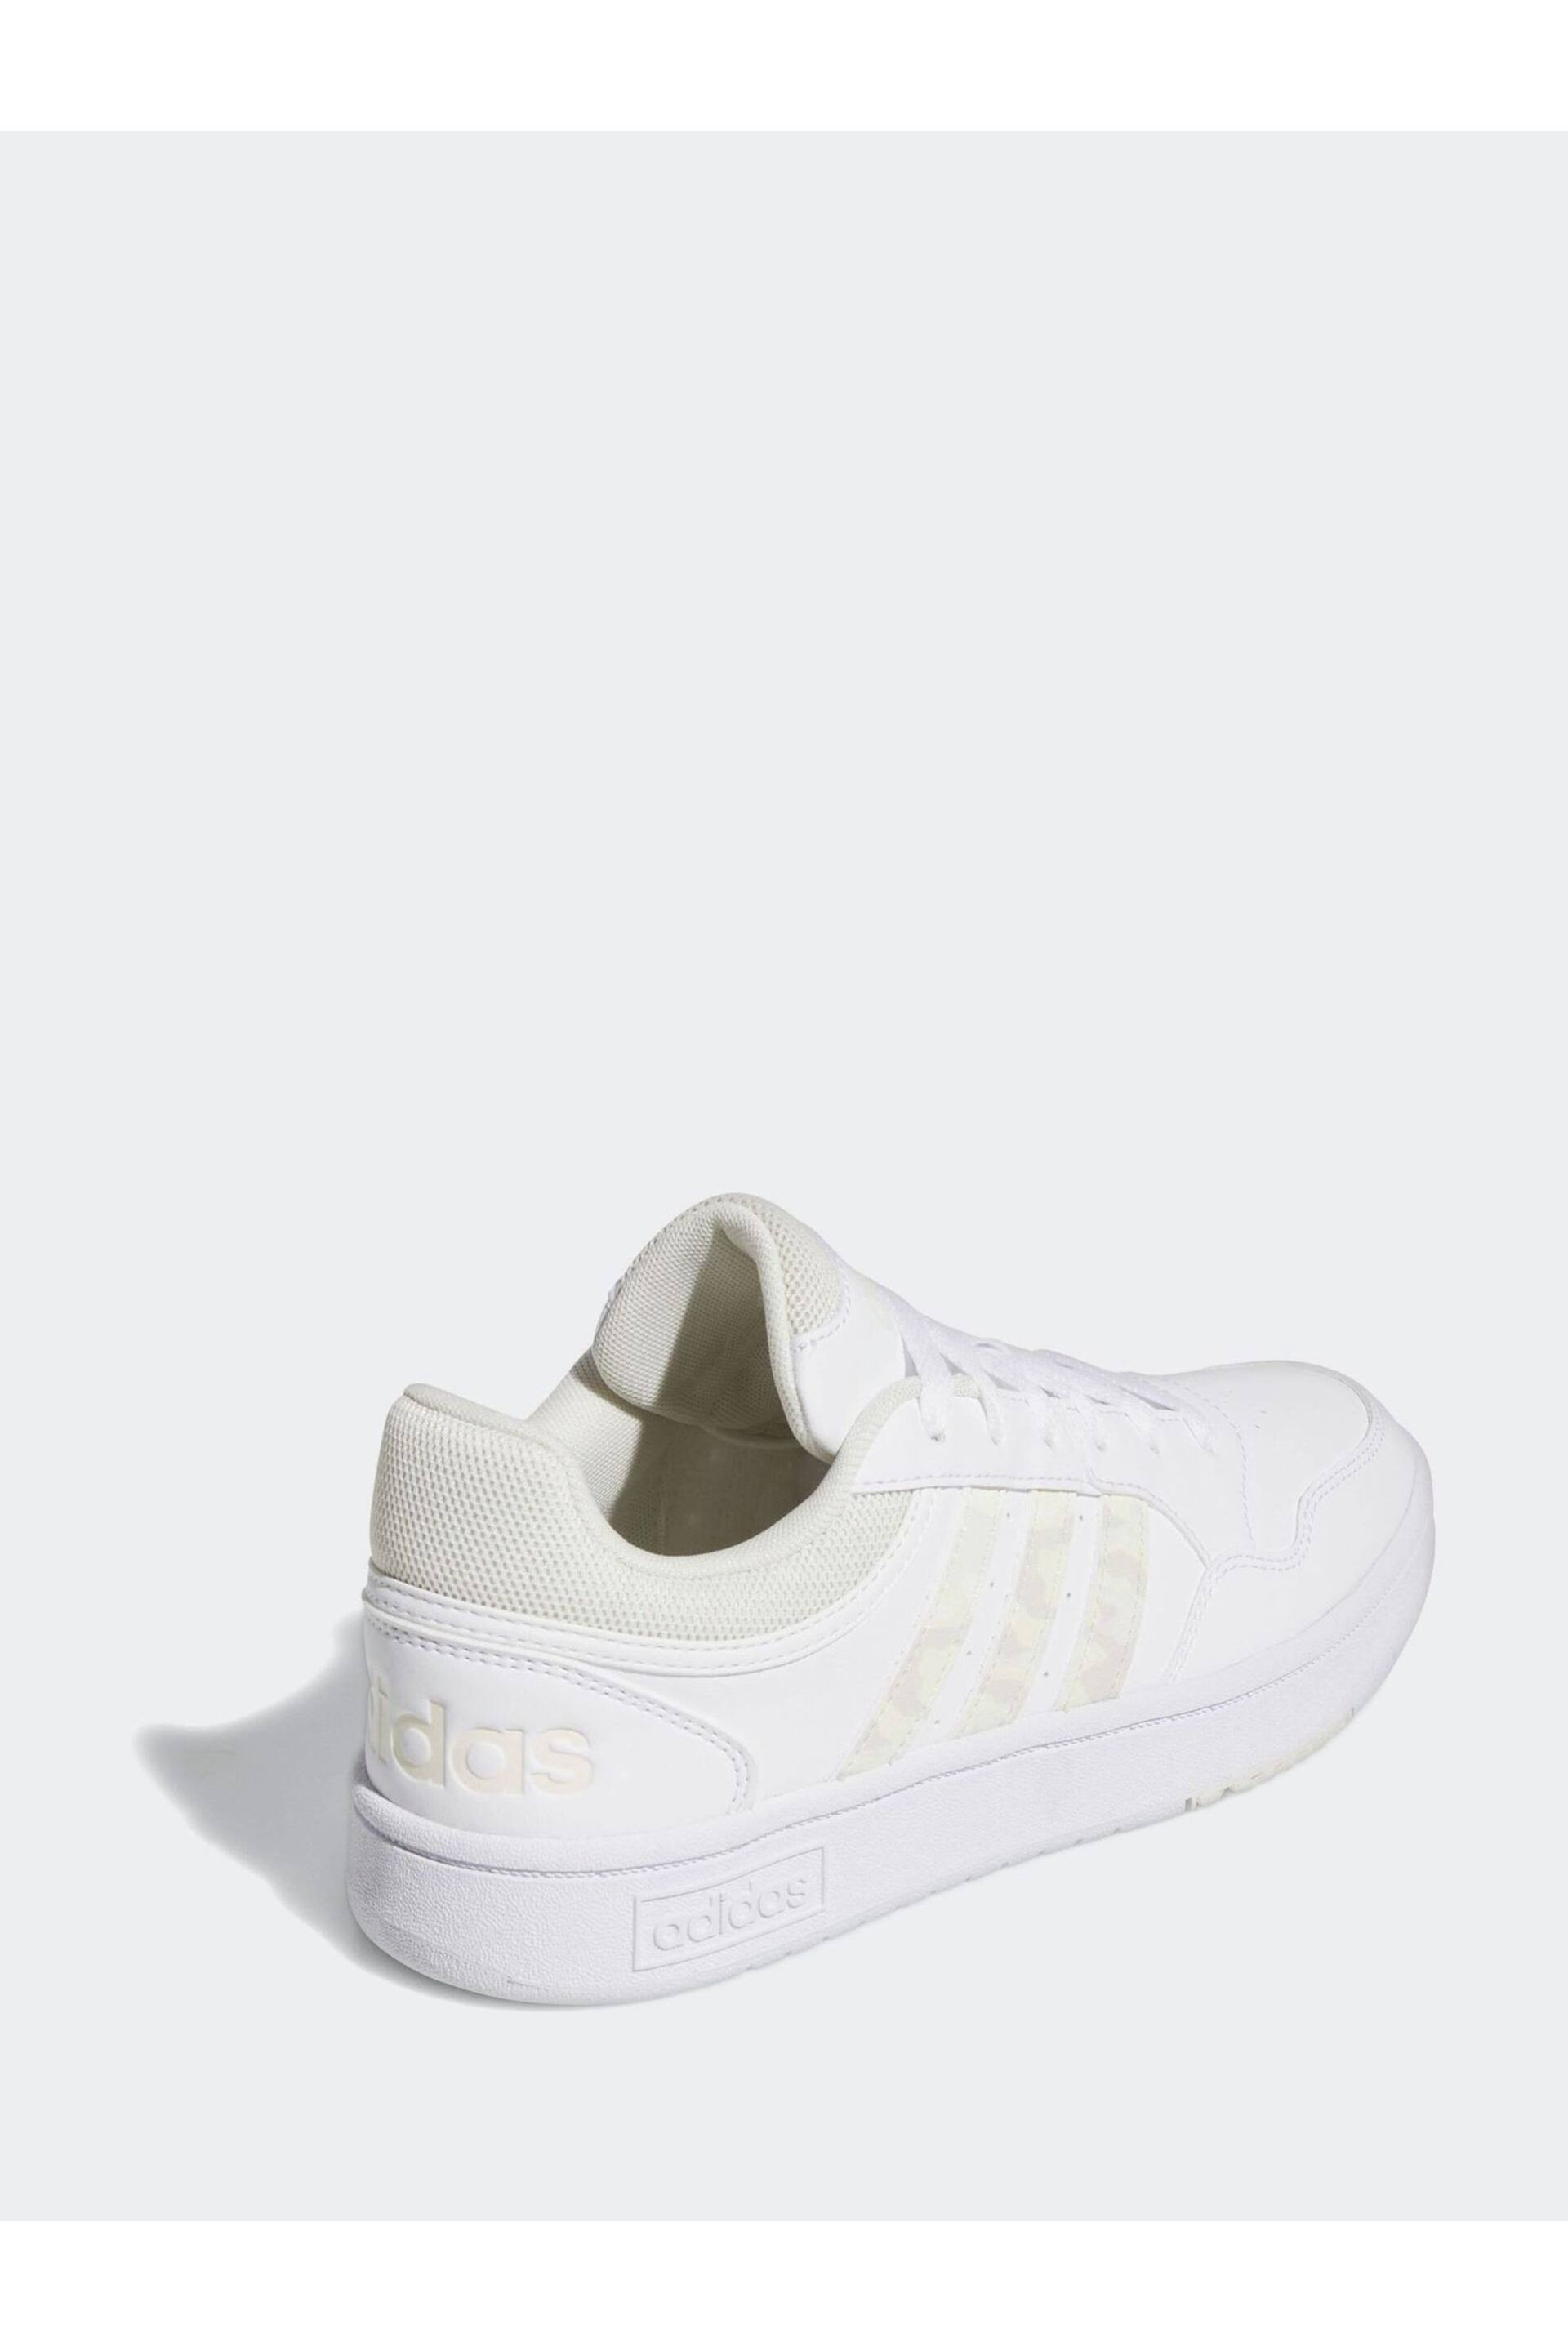 adidas White Originals Hoops 3 Trainers - Image 4 of 8